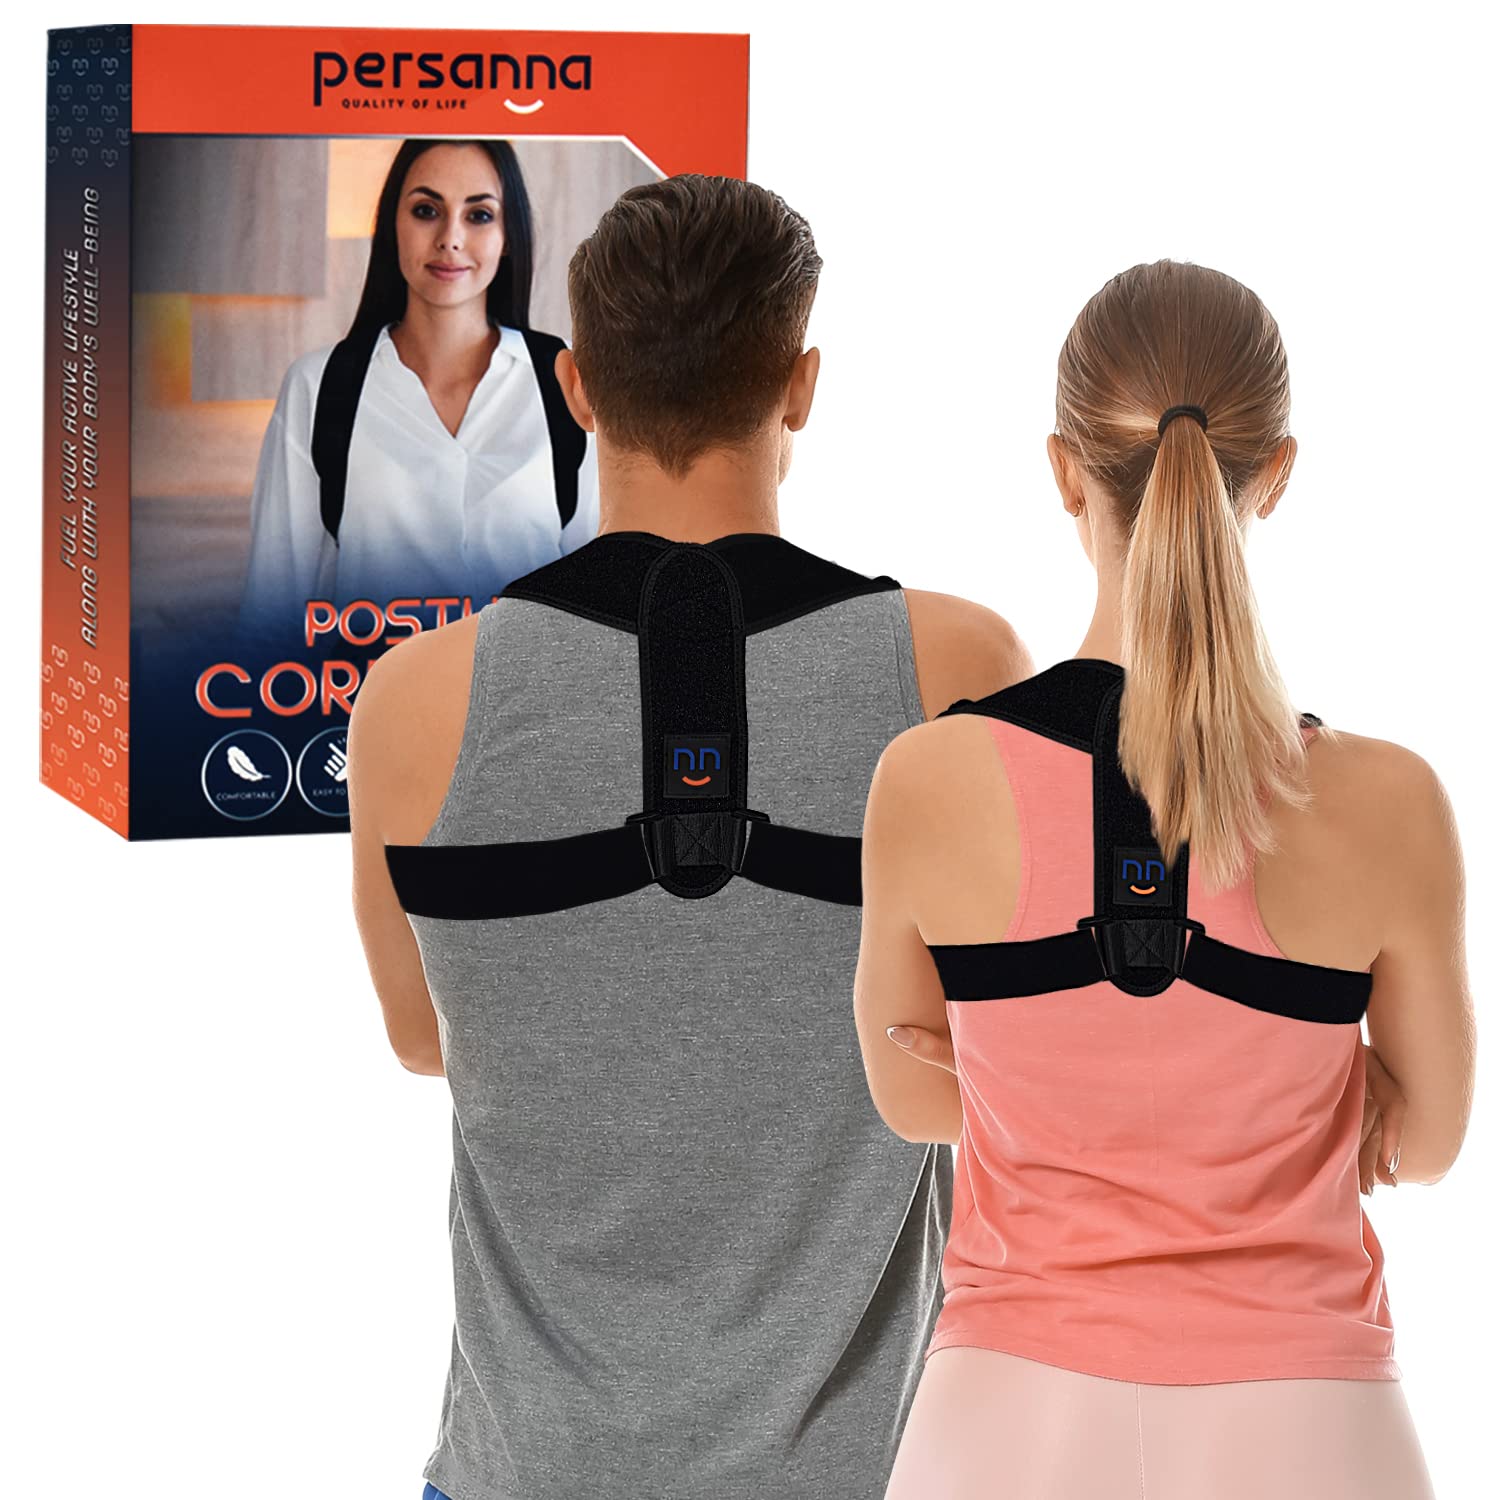 Persanna Posture Corrector Back Brace For Women And Men- Excellent